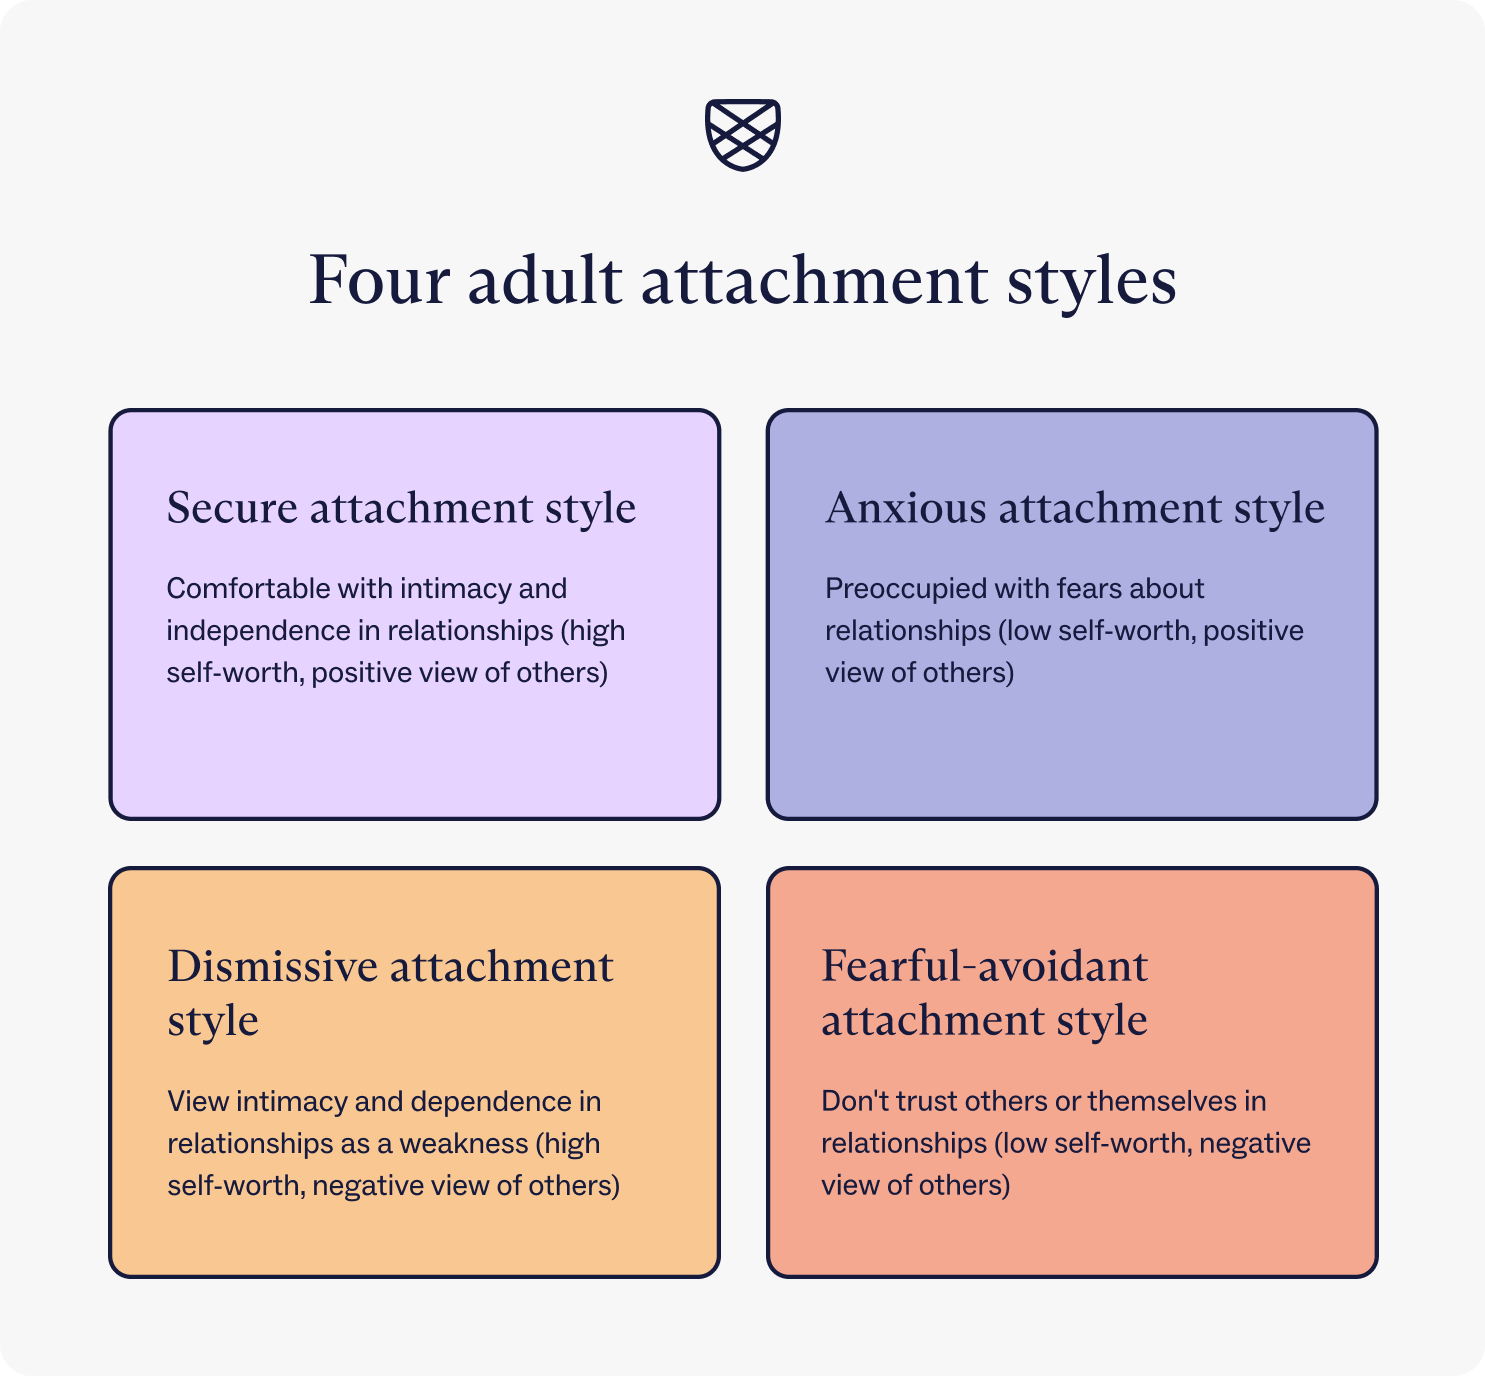 A Brief Overview of Adult Attachment Theory and Research